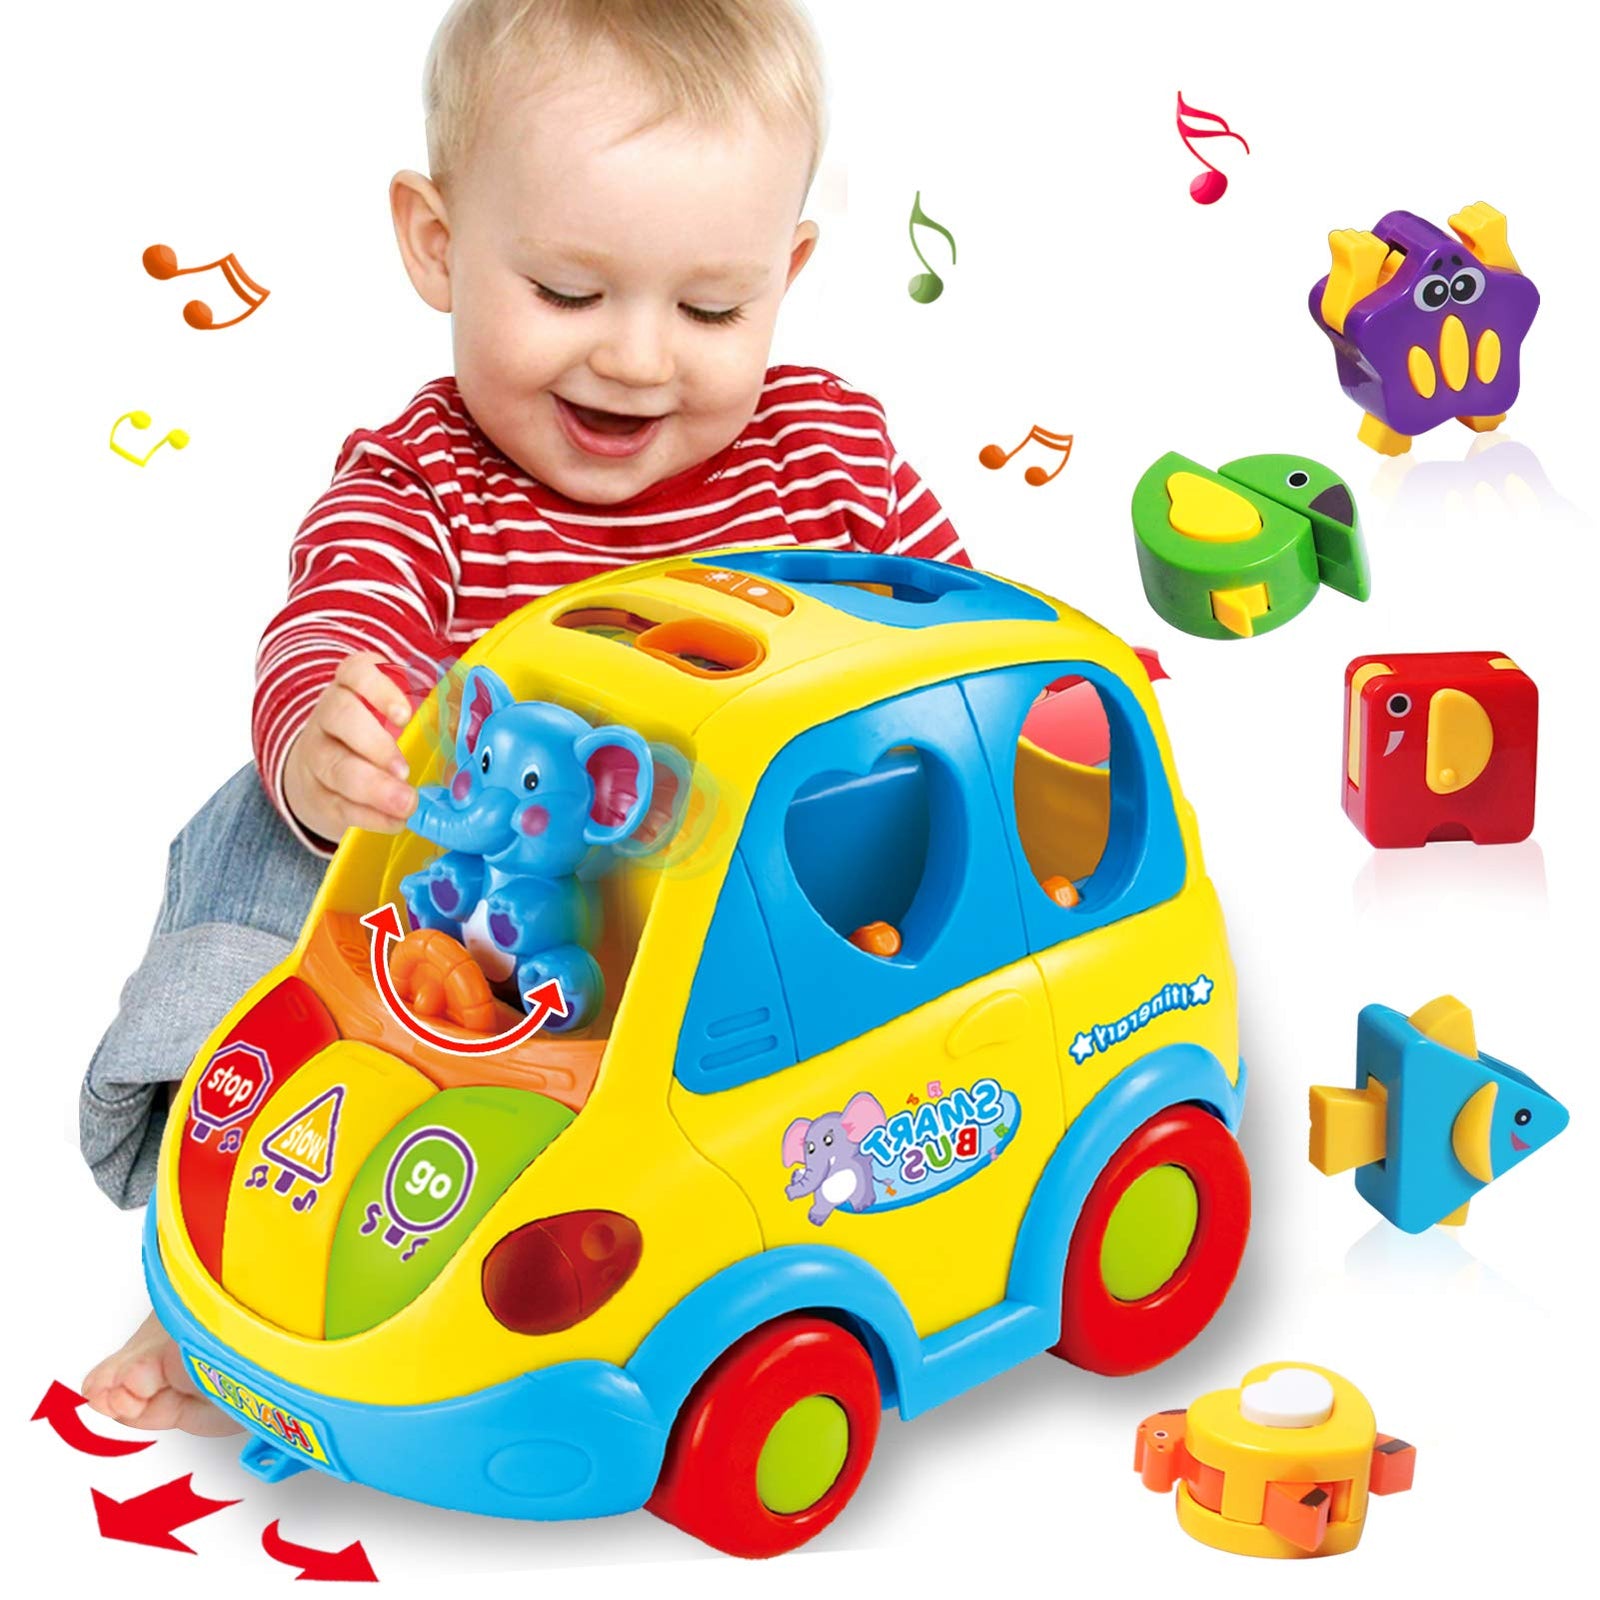 DUMMA Baby Toys 12-18 Months Musical Bus Toys for 1 2 3 4+Year Old Boys Girls Gifts,Early Education Learning Toy with Fruit/Music/Lighting/Smart Shapes for 18-24 Months Birthday Gifts